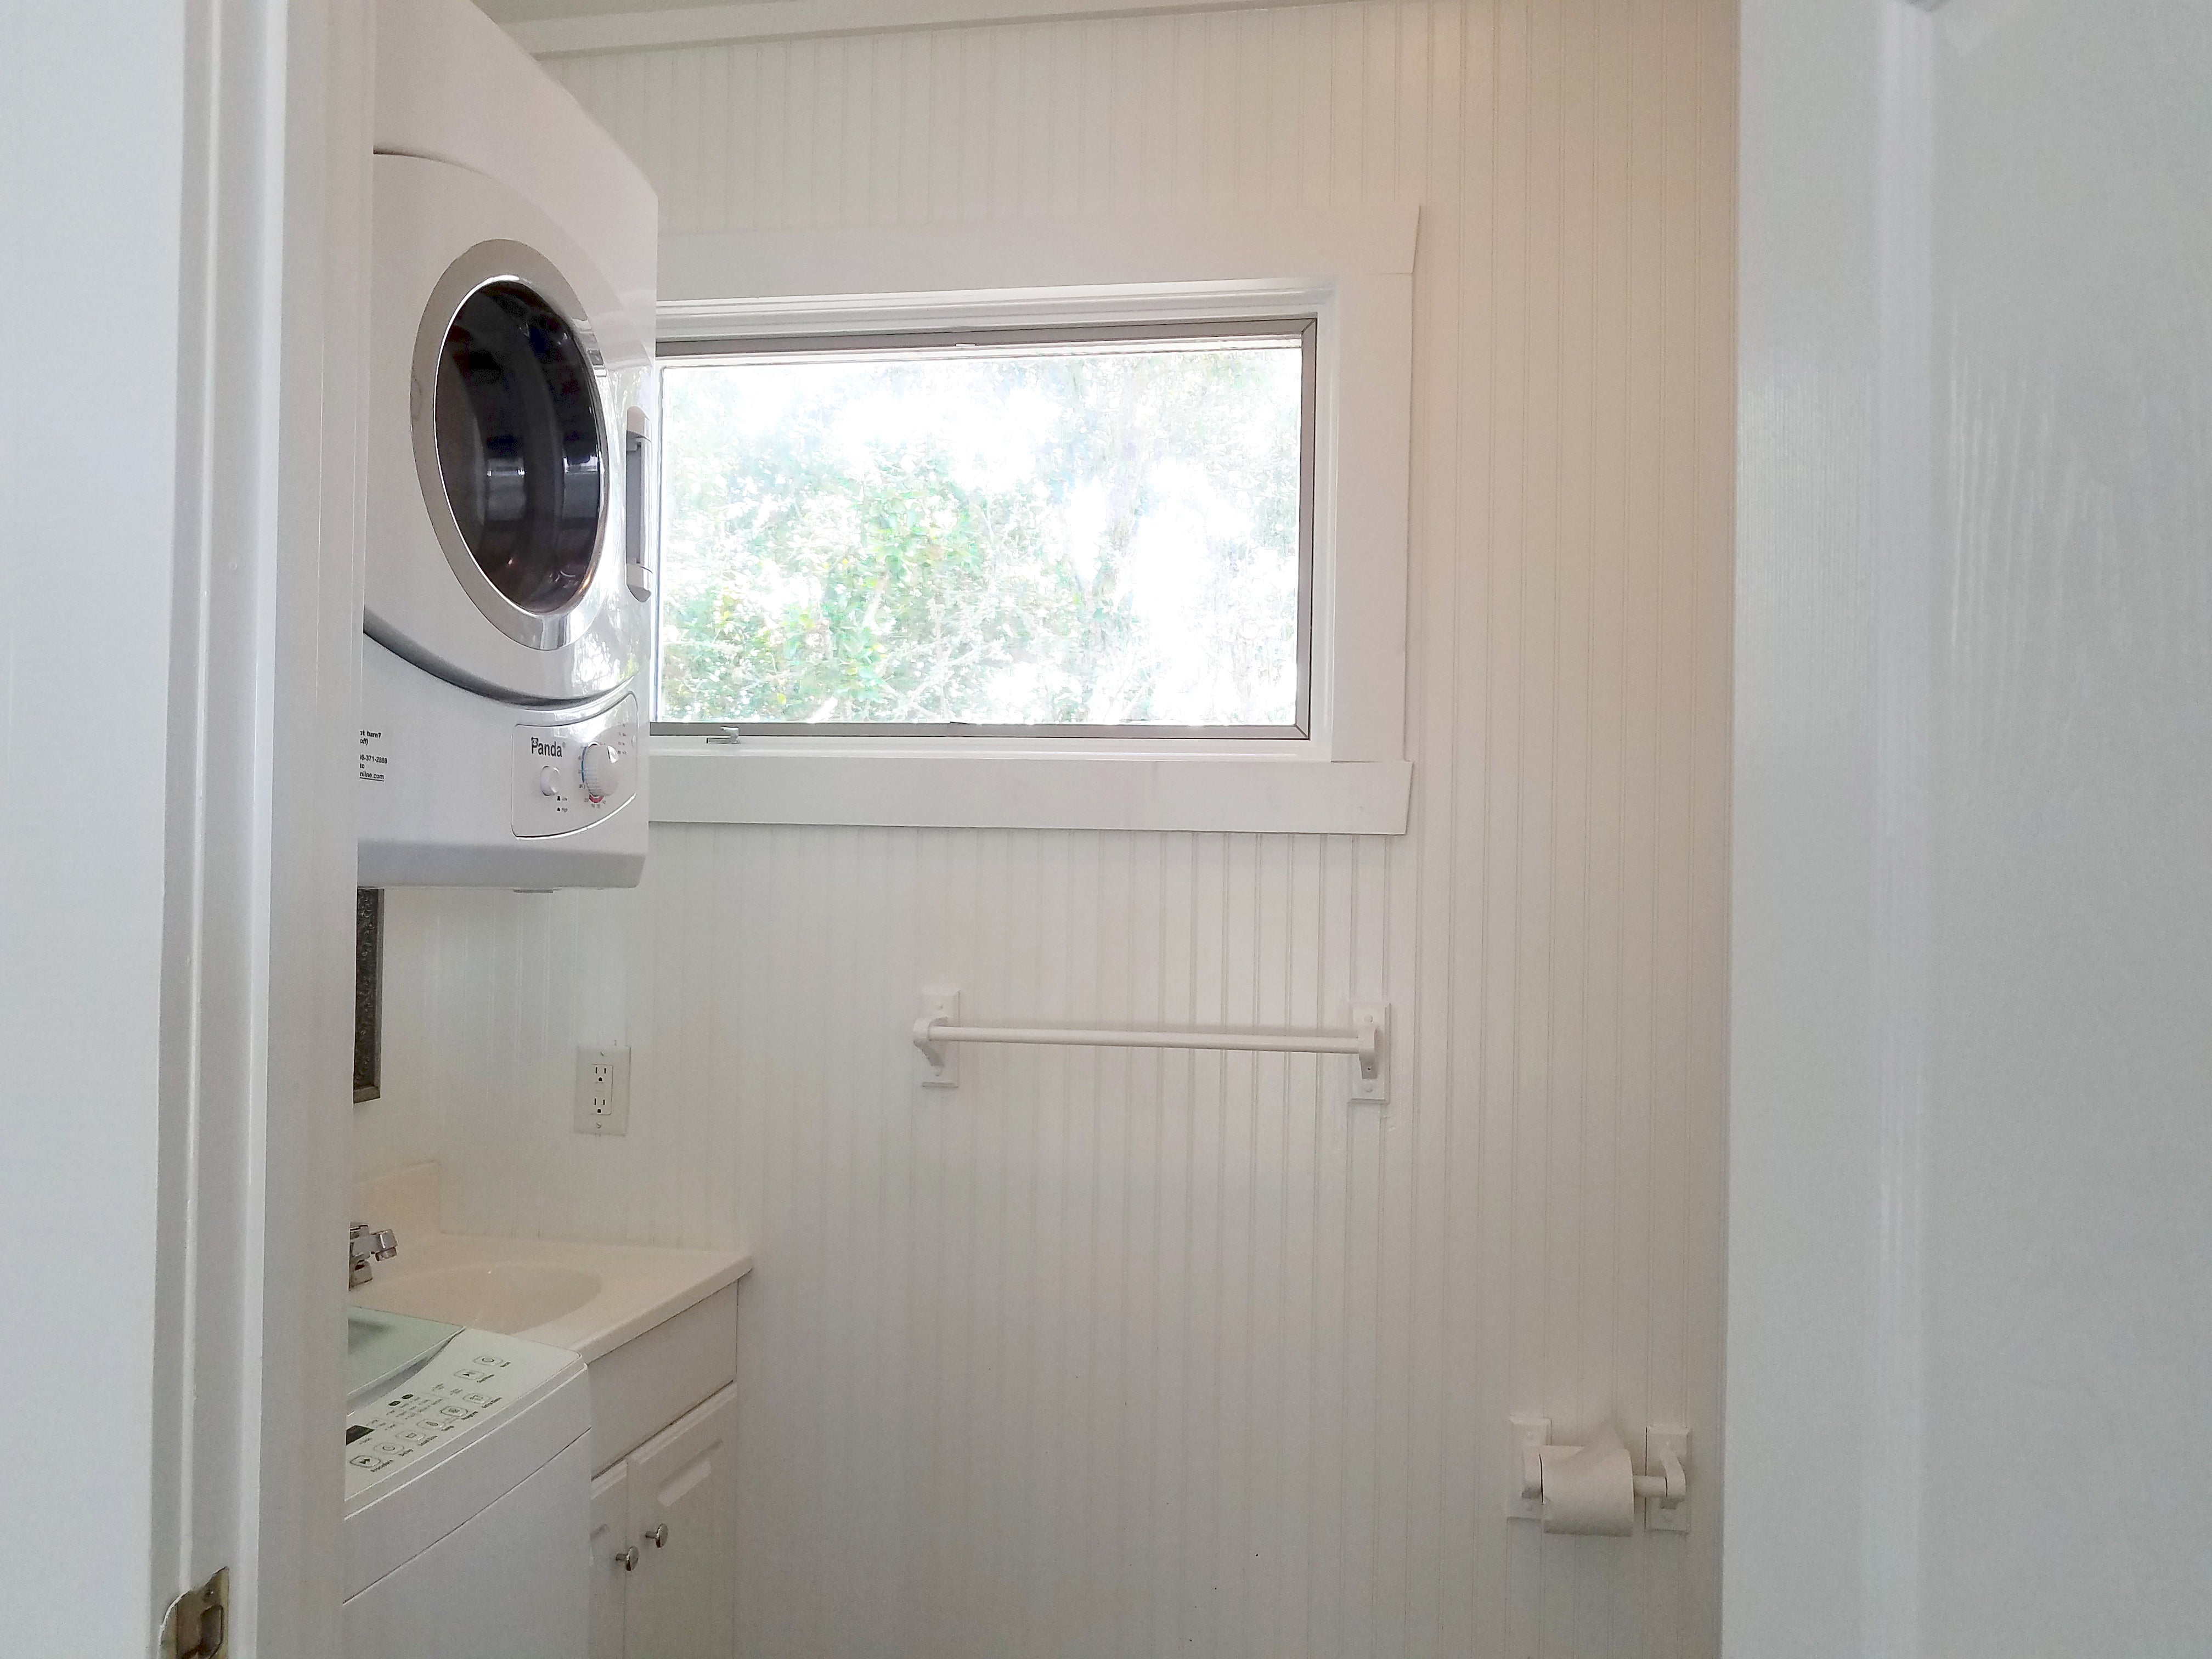 Enclosed Bathroom with Vanity, Toilet, and Stack WasherDryer